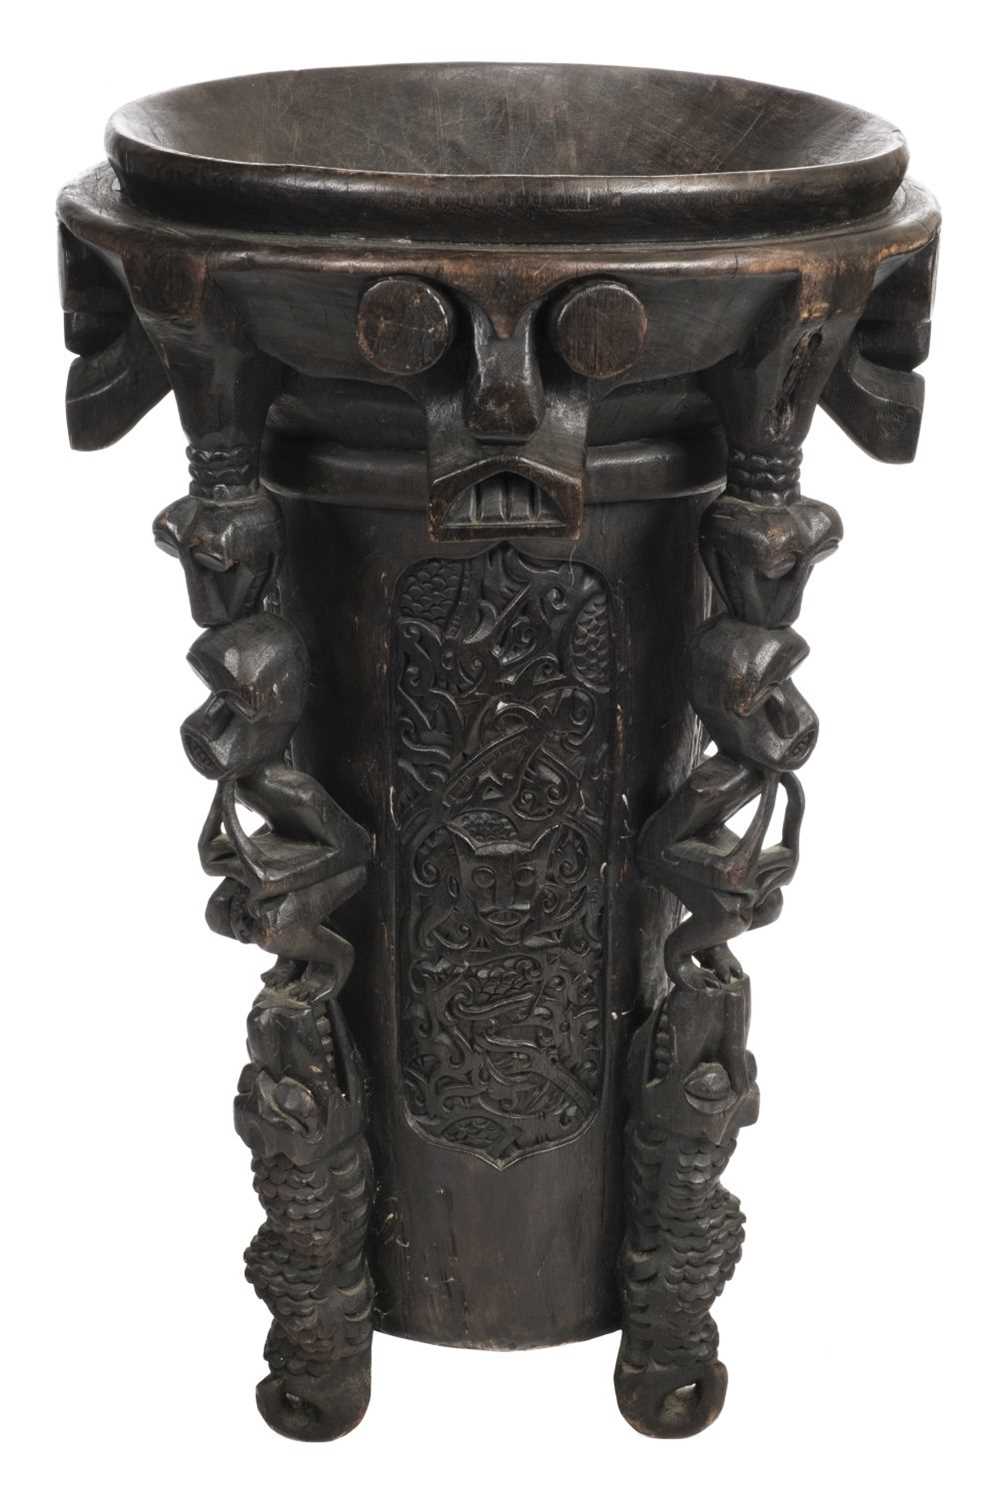 Lot 321 - Indonesia. A Dyak tribe carved wood stool or vessel